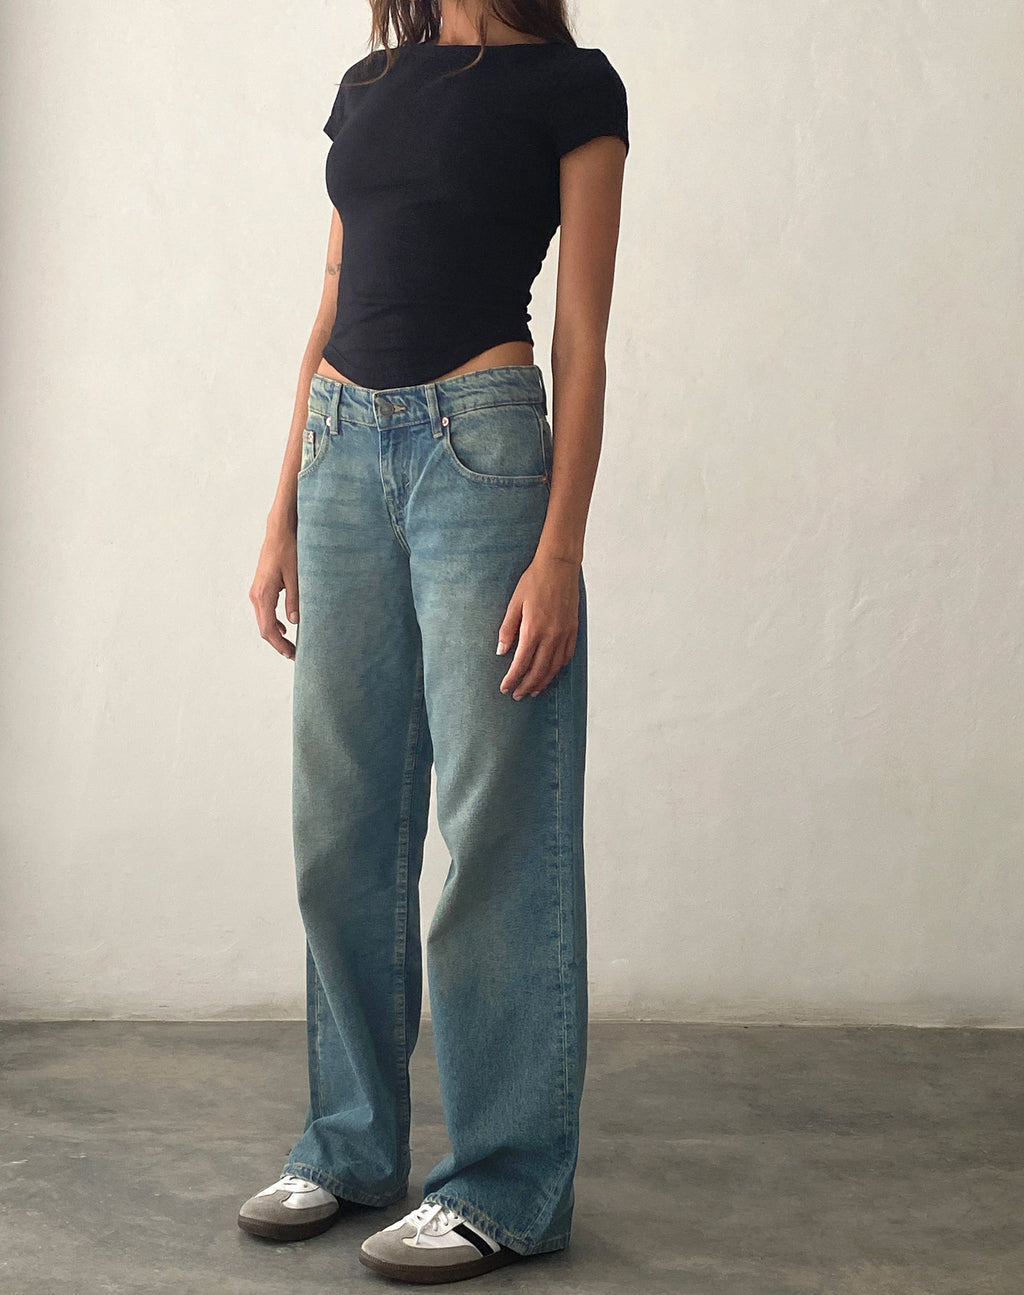 Low Rise Parallel Jeans in Vintage Blue Green